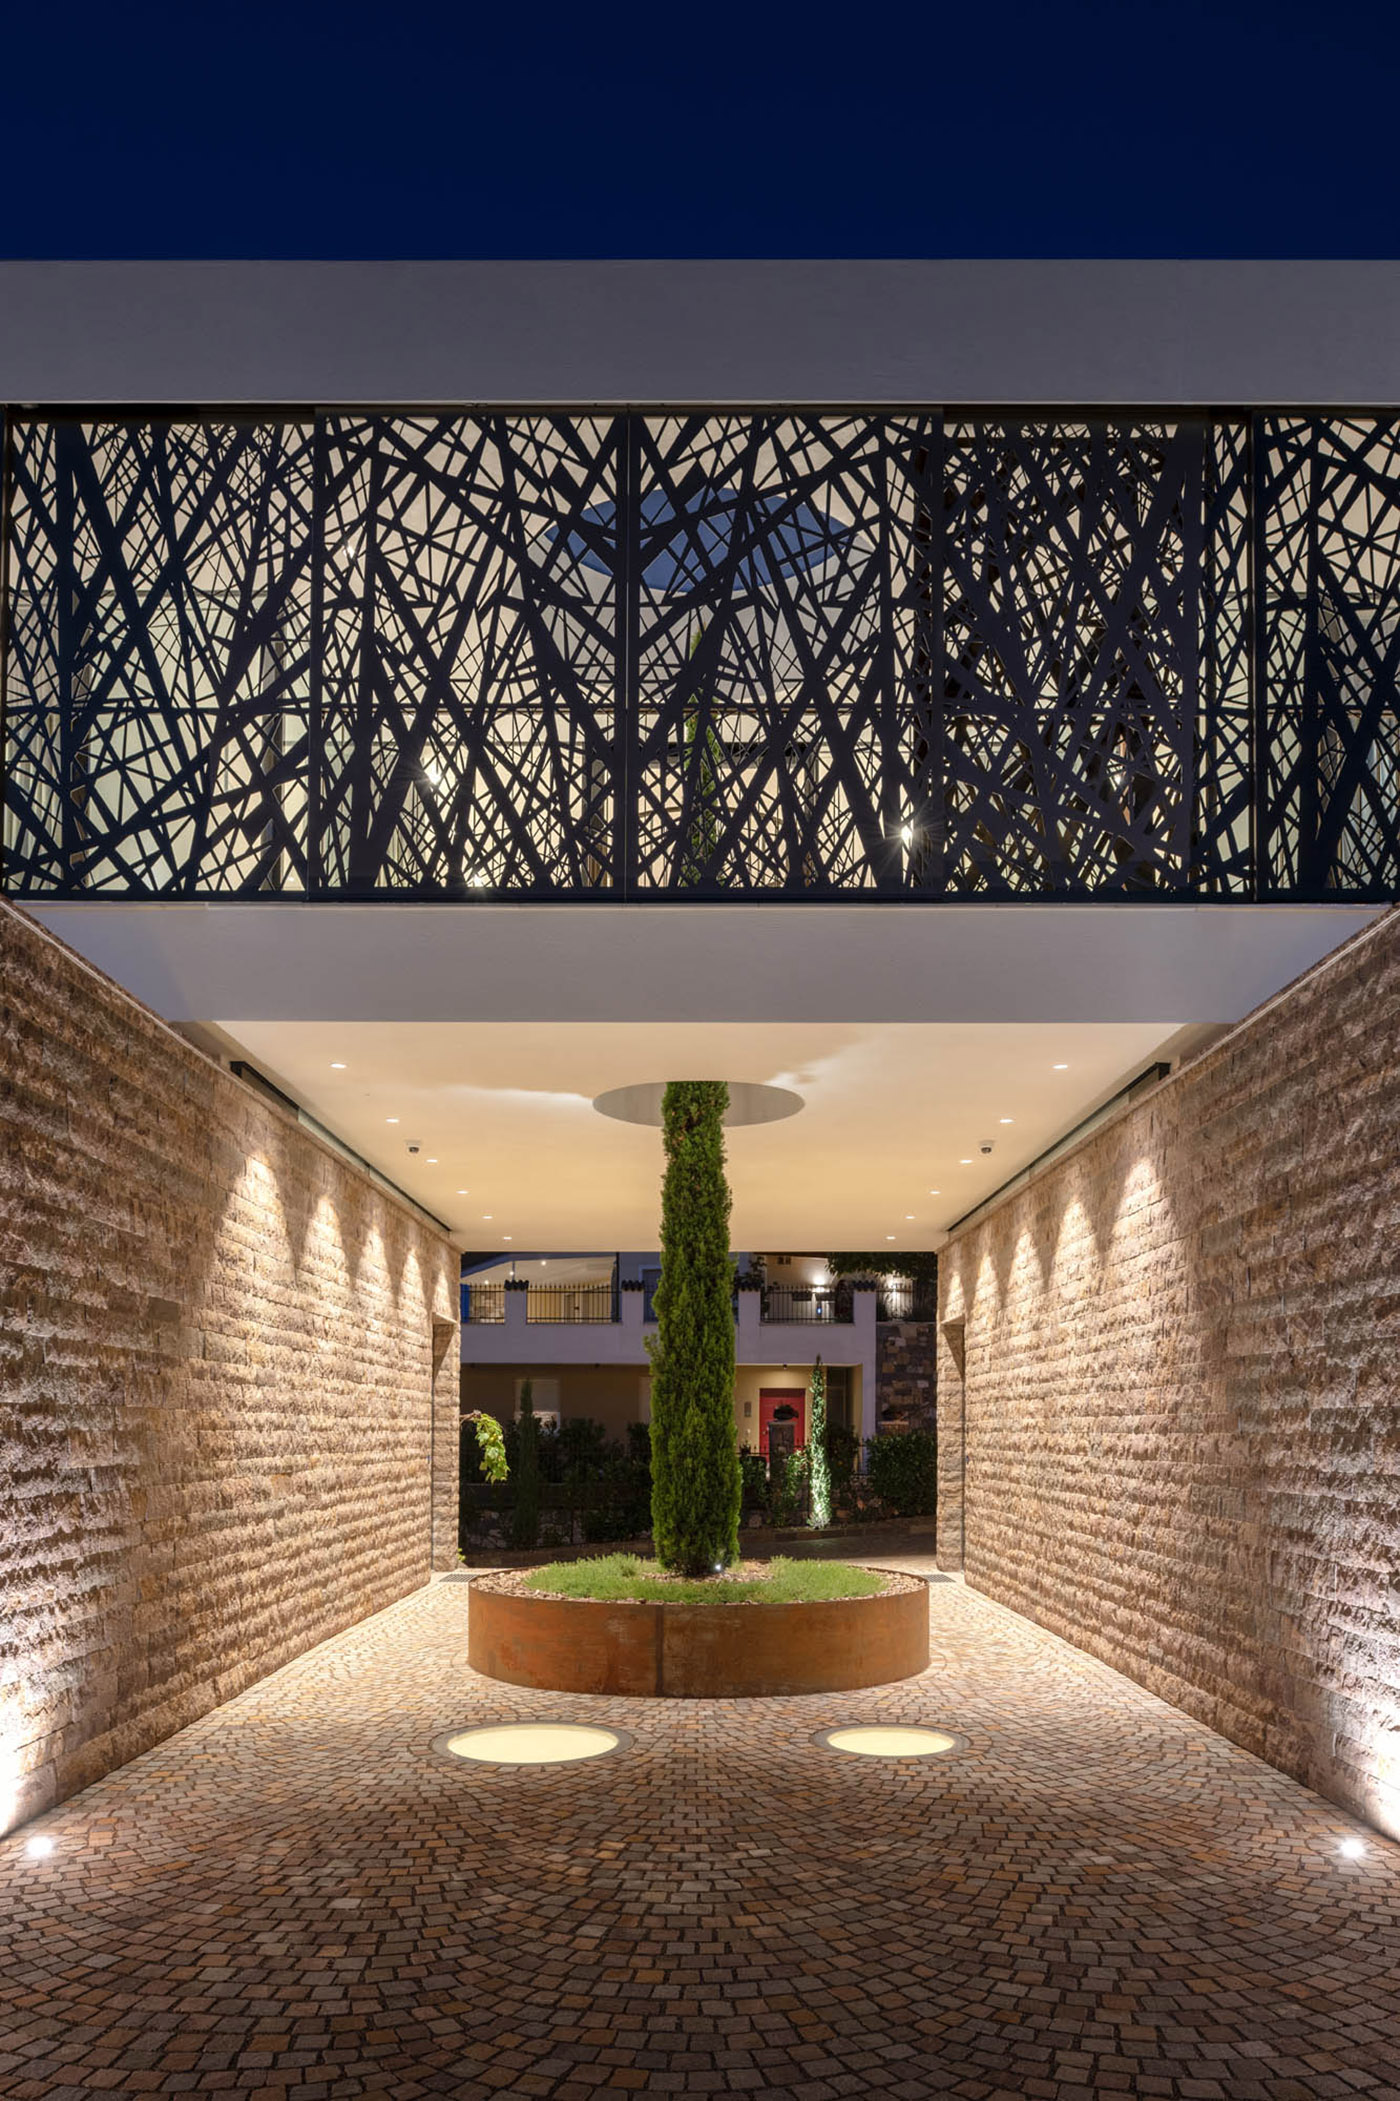 Casa P2, the architecture narrates the porphyry of Monticolo and the Mendola vineyards